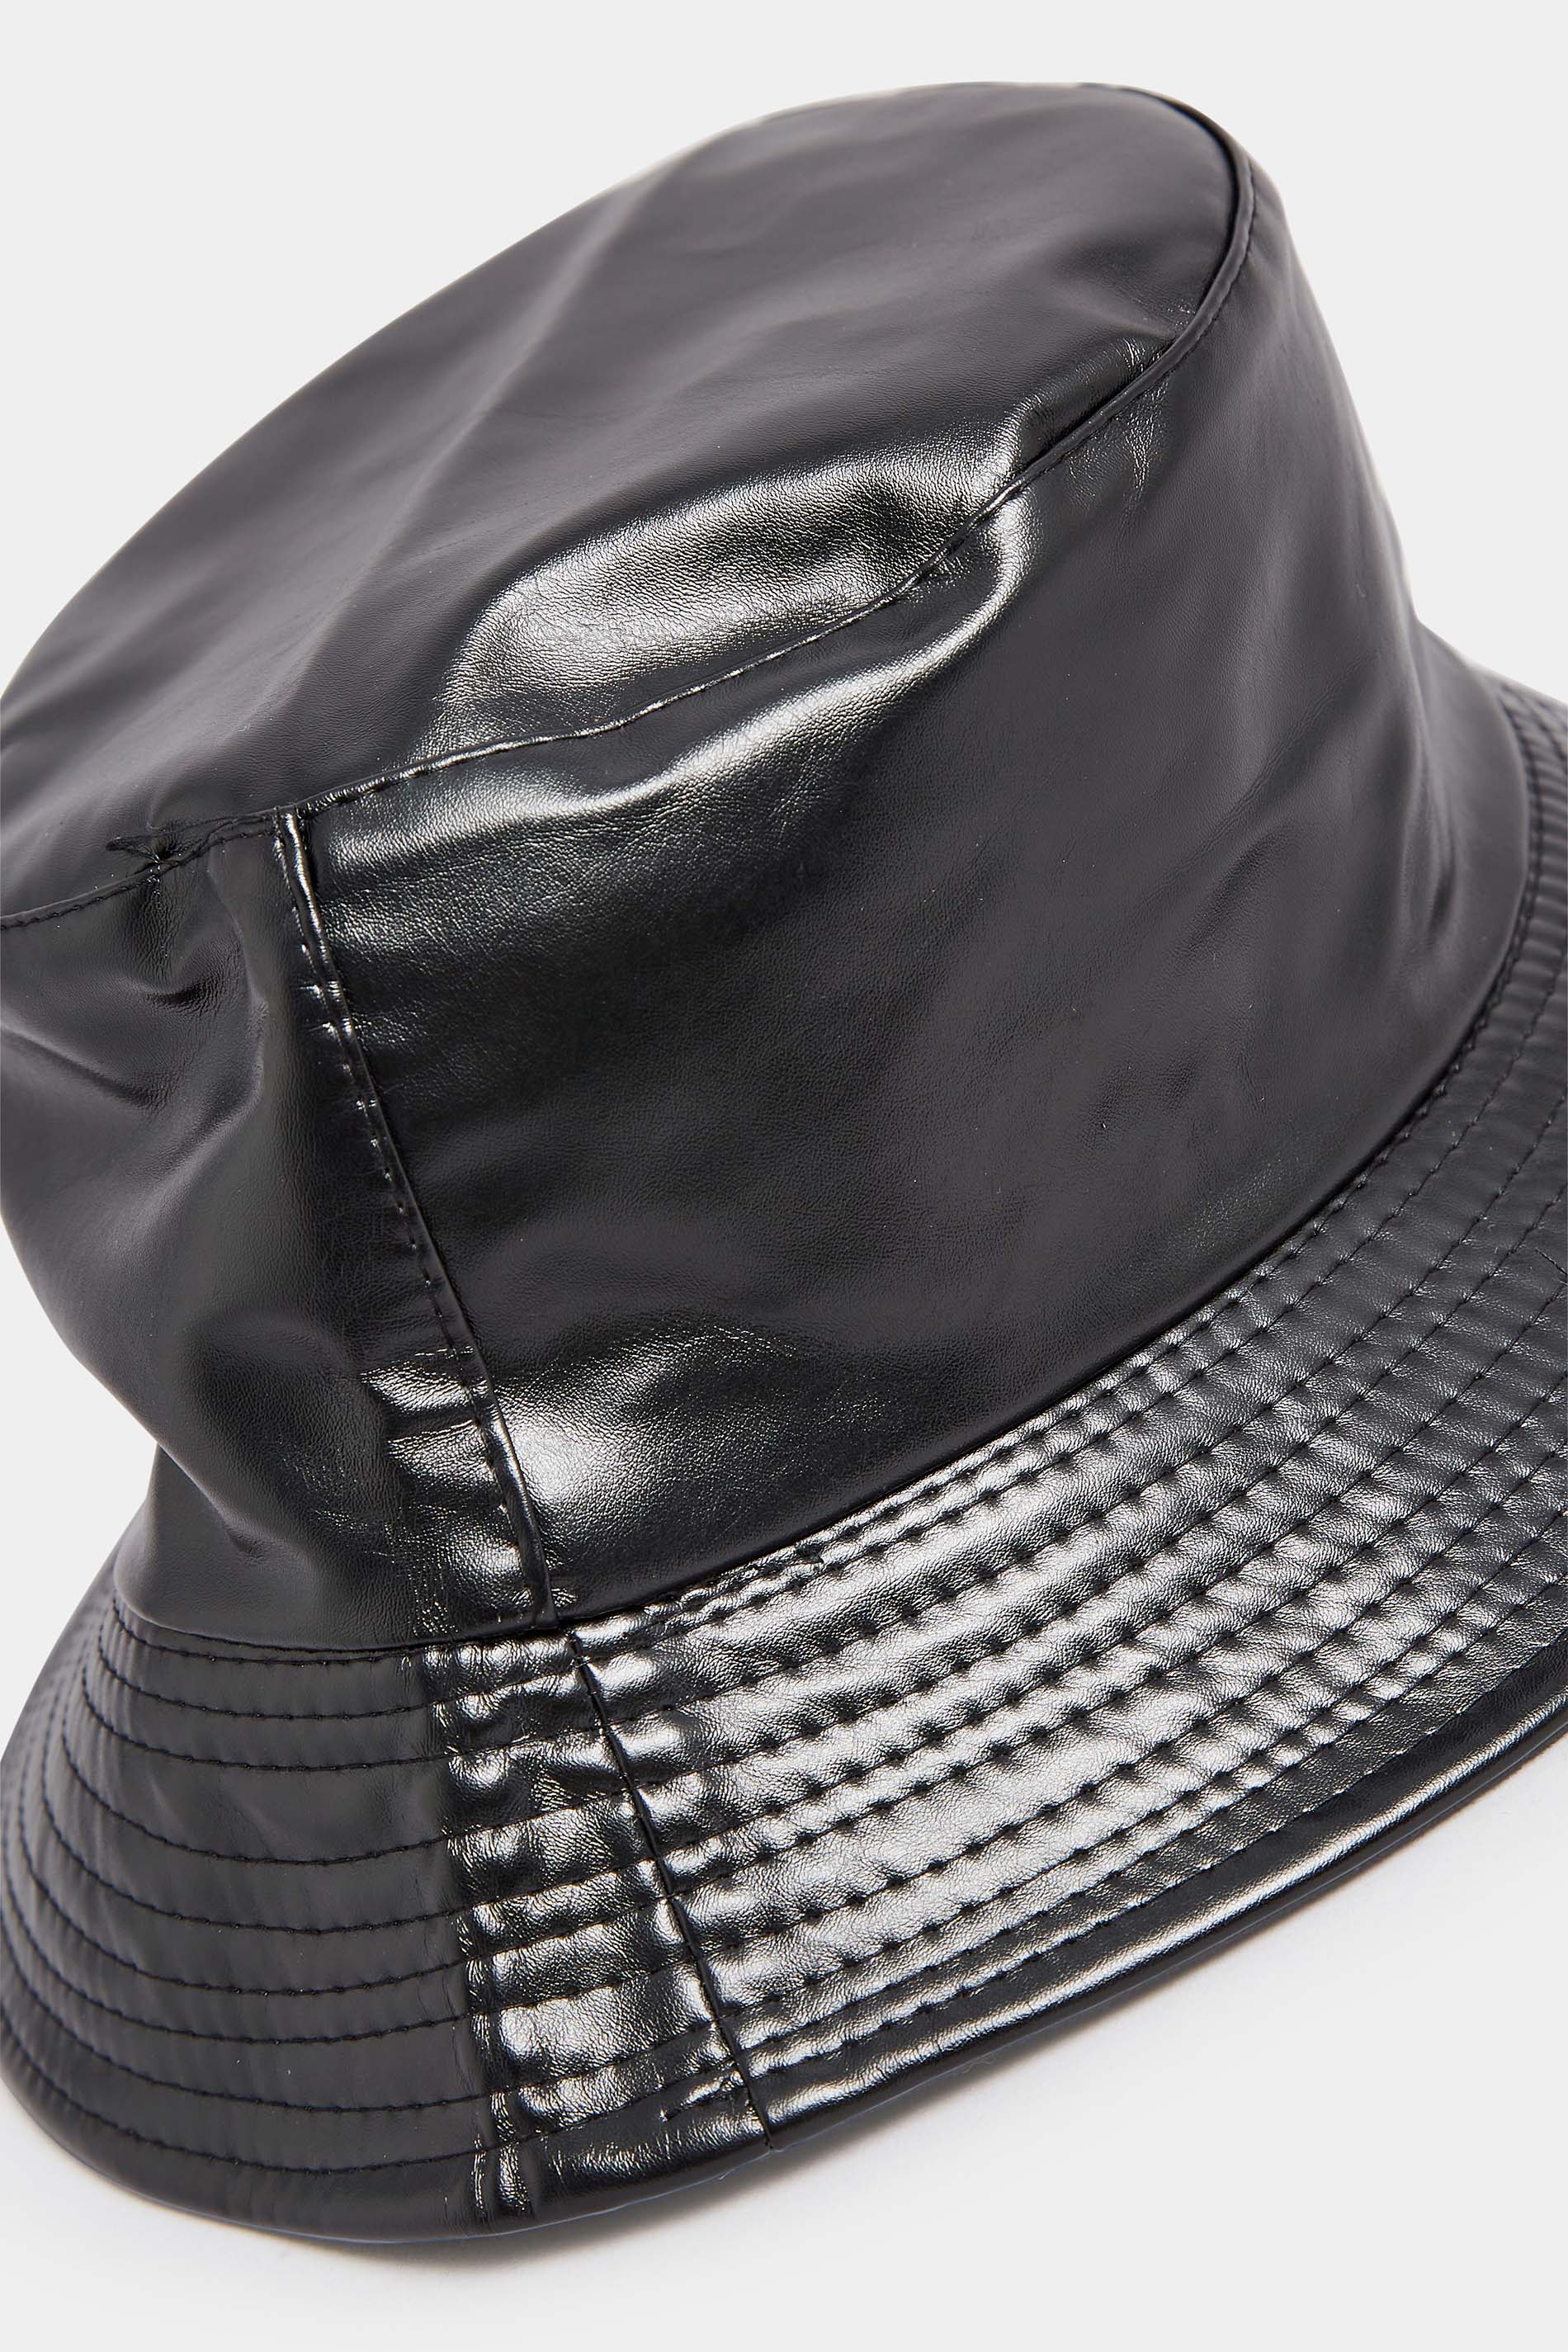 Black Faux Leather Bucket Hat | Yours Clothing 3